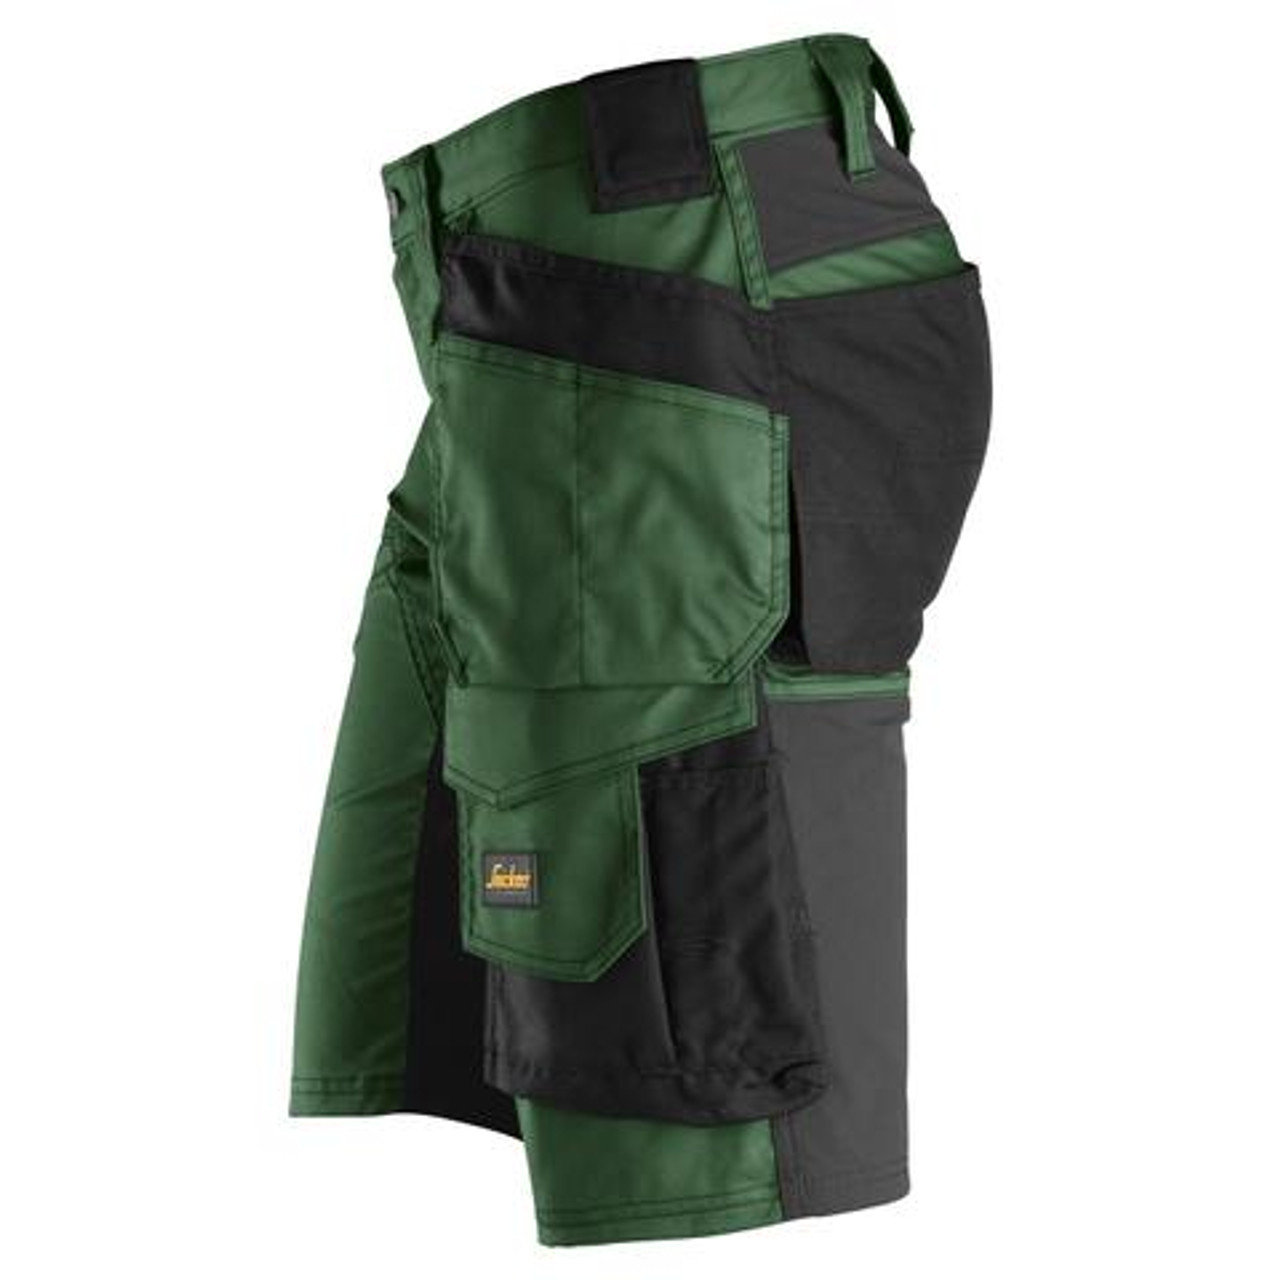 SNICKERS Cotton with Stretch Green Shorts for Carpenters that have Holster Pockets  available in Australia and New Zealand